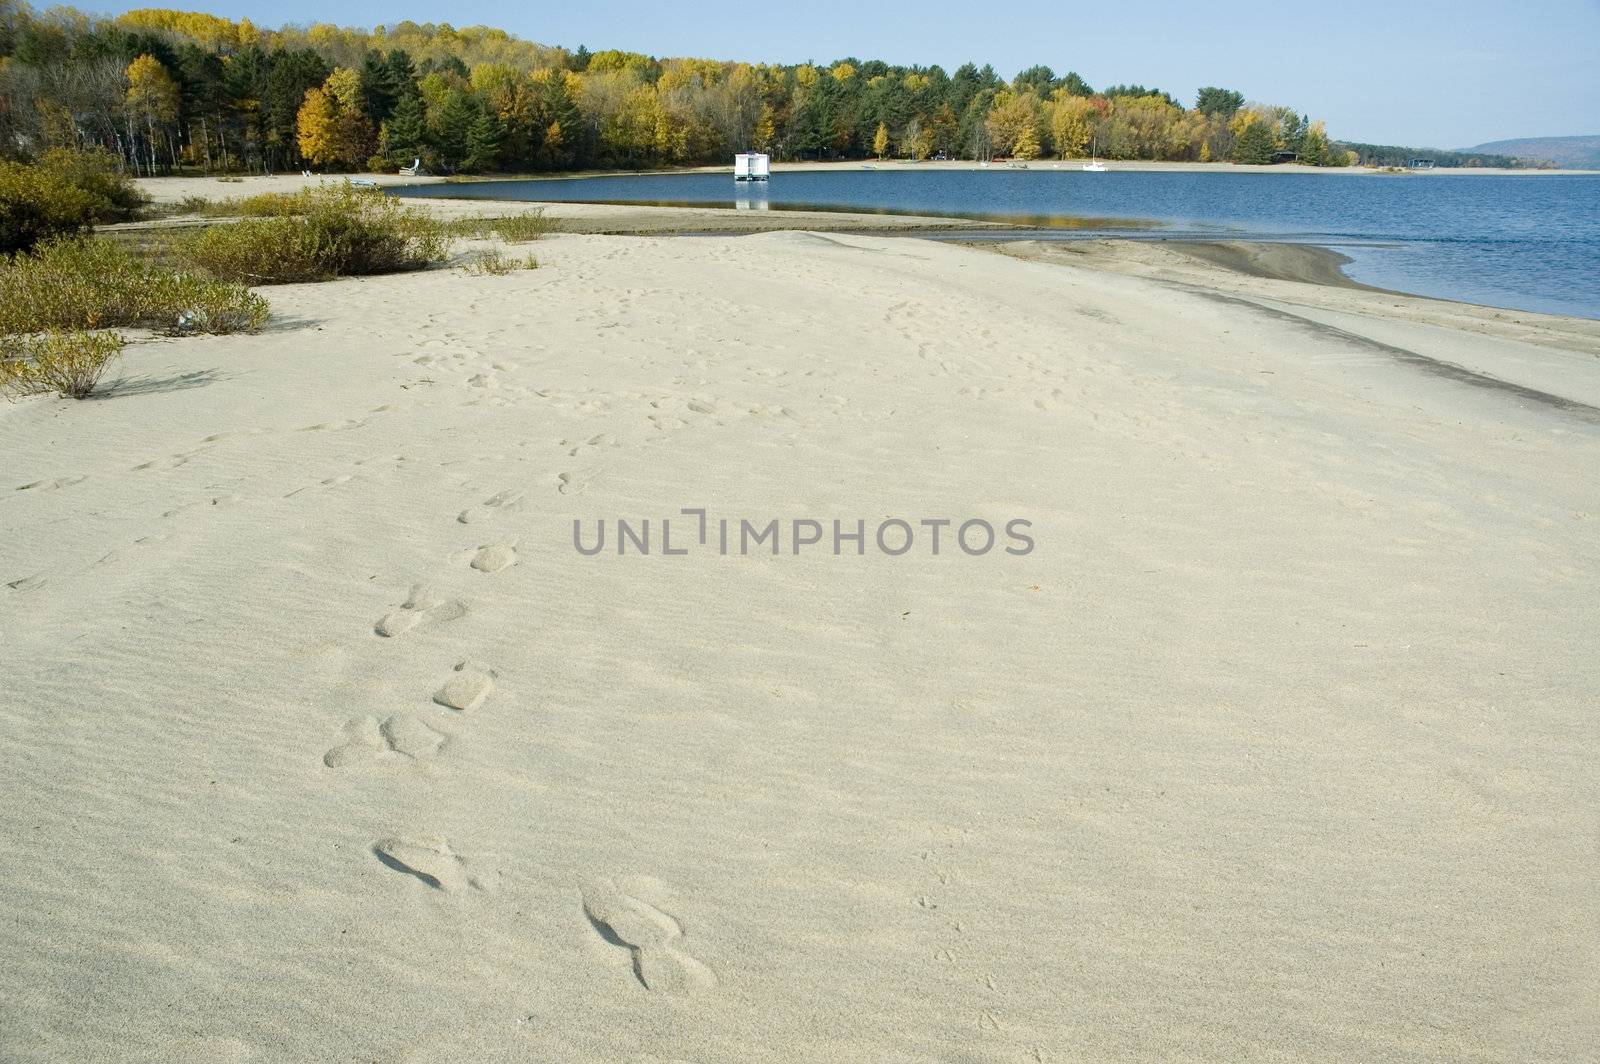 some footprints in the sand across a beach